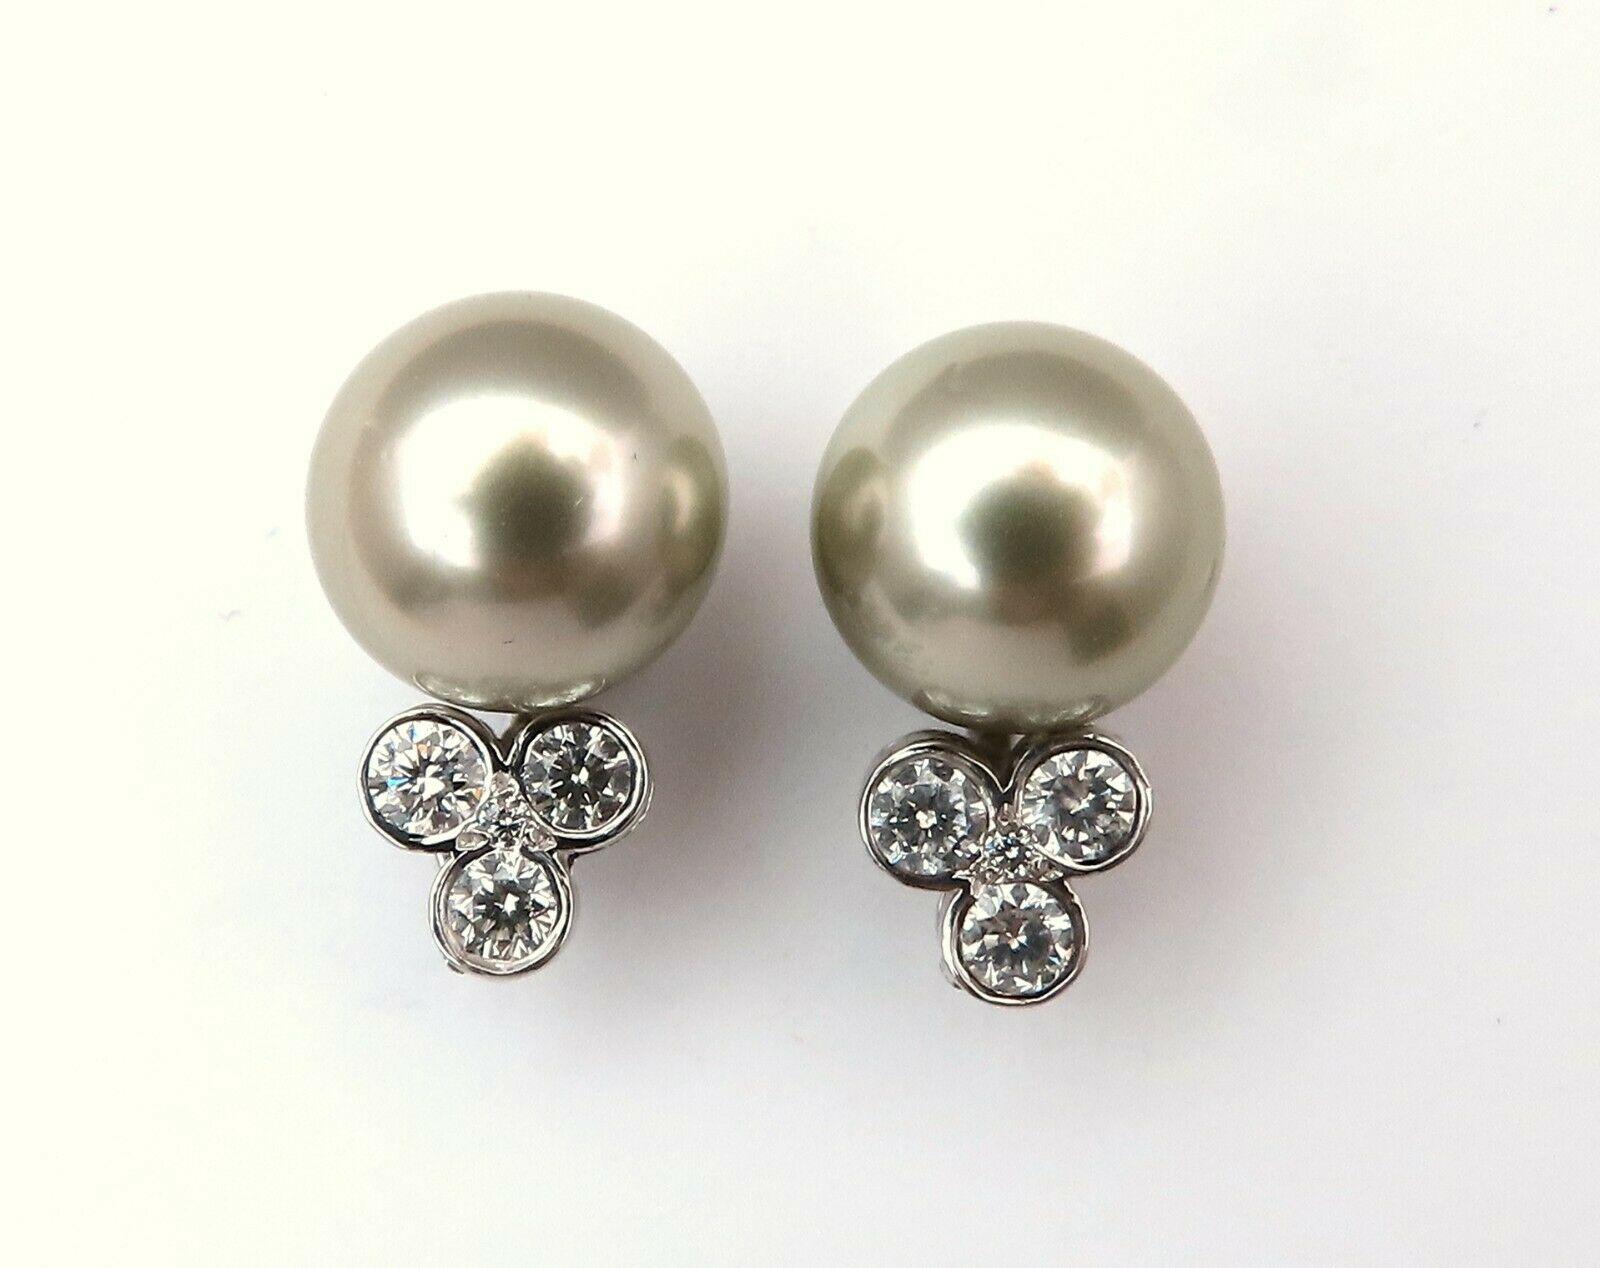 Classic Tahitian stud Pearl earrings.

Pearl: 11.2MM

Excellent AAA luster and Sheen.

.60 carat natural round diamonds .

H color vs2 clarity.

14 karat white gold 7.2 g.

Overall earrings measure 18mm long

12mm depth.

Comfortable Butterfly